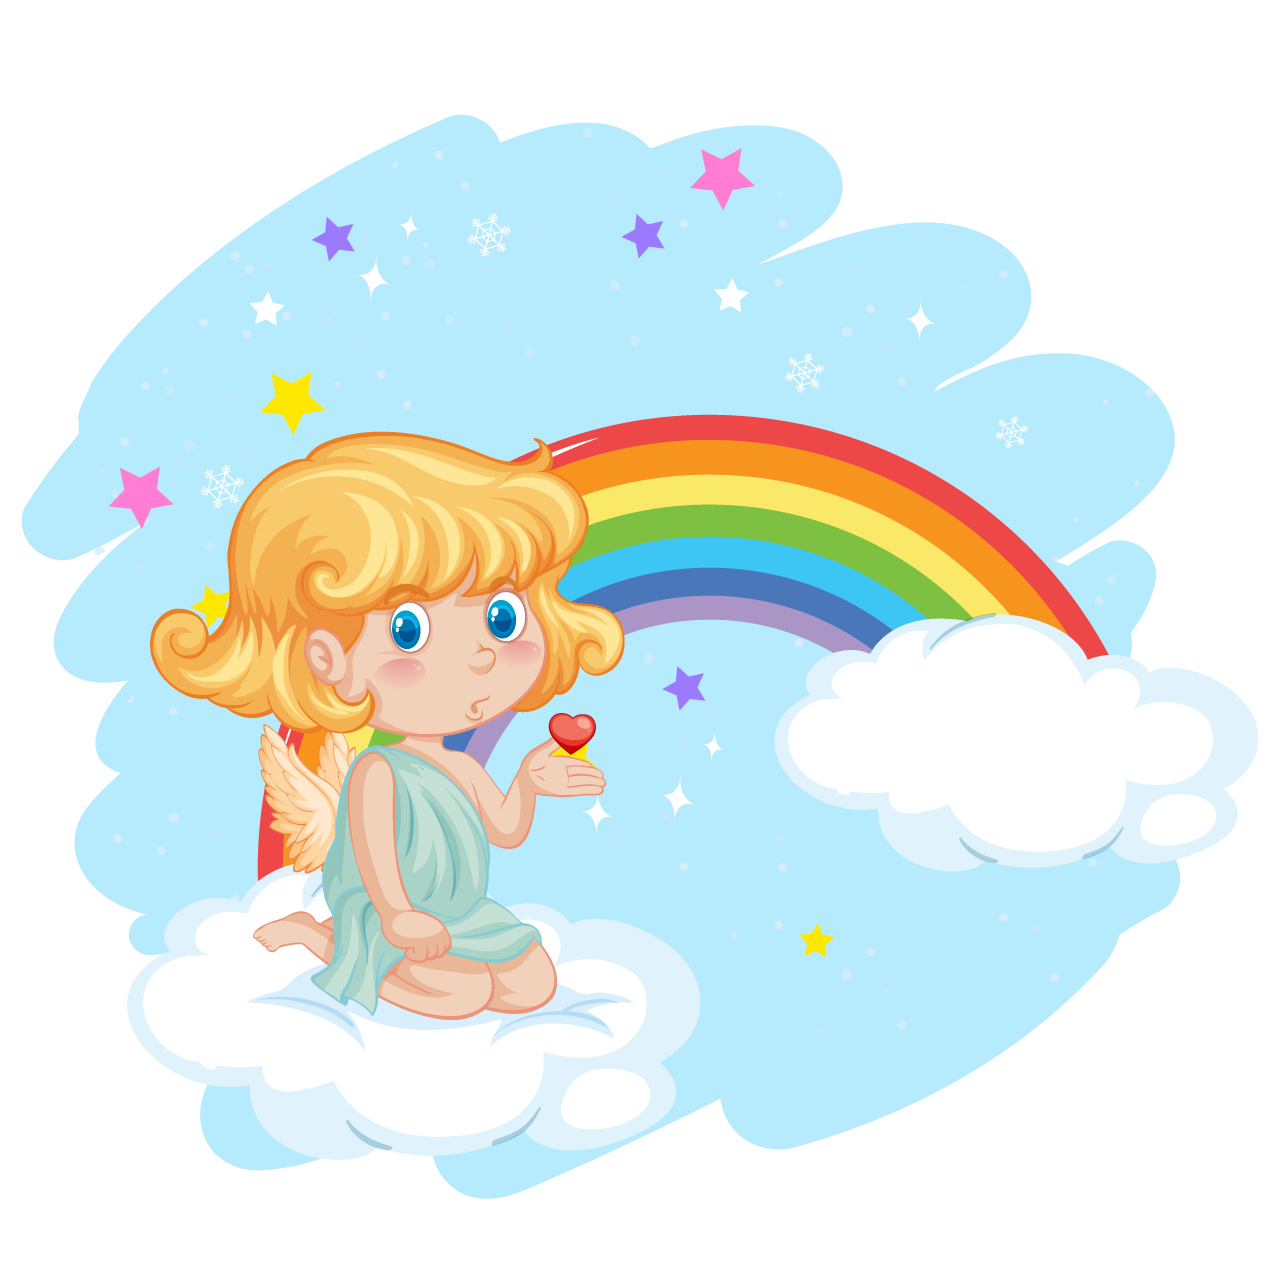 Red heart clipart angel girl cloud with rainbow cartoon illustration image transparent background png